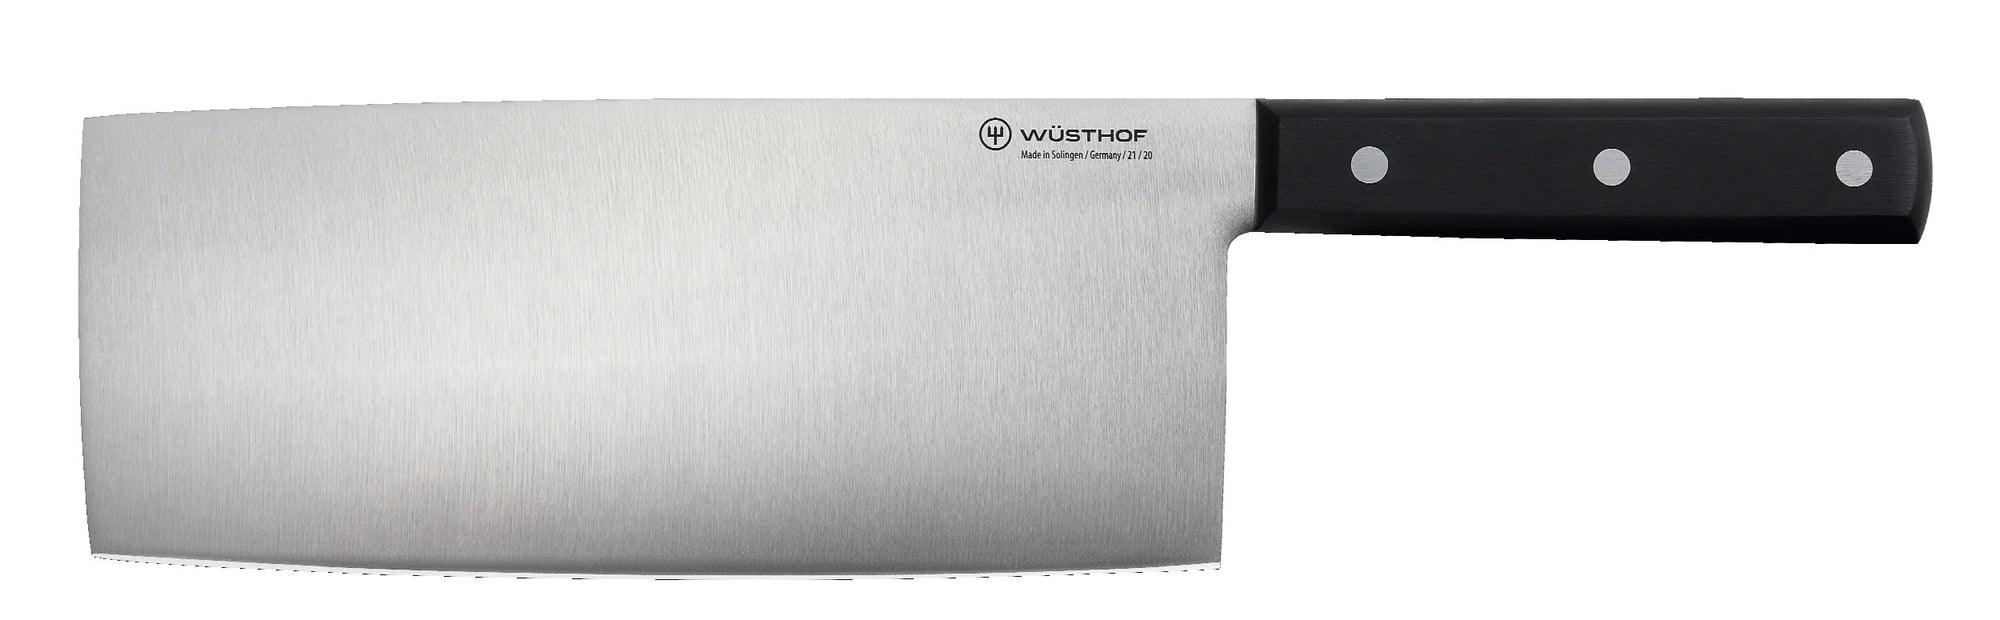 Wusthof Chinese Chef's Knife, 8-inch (20 cm)